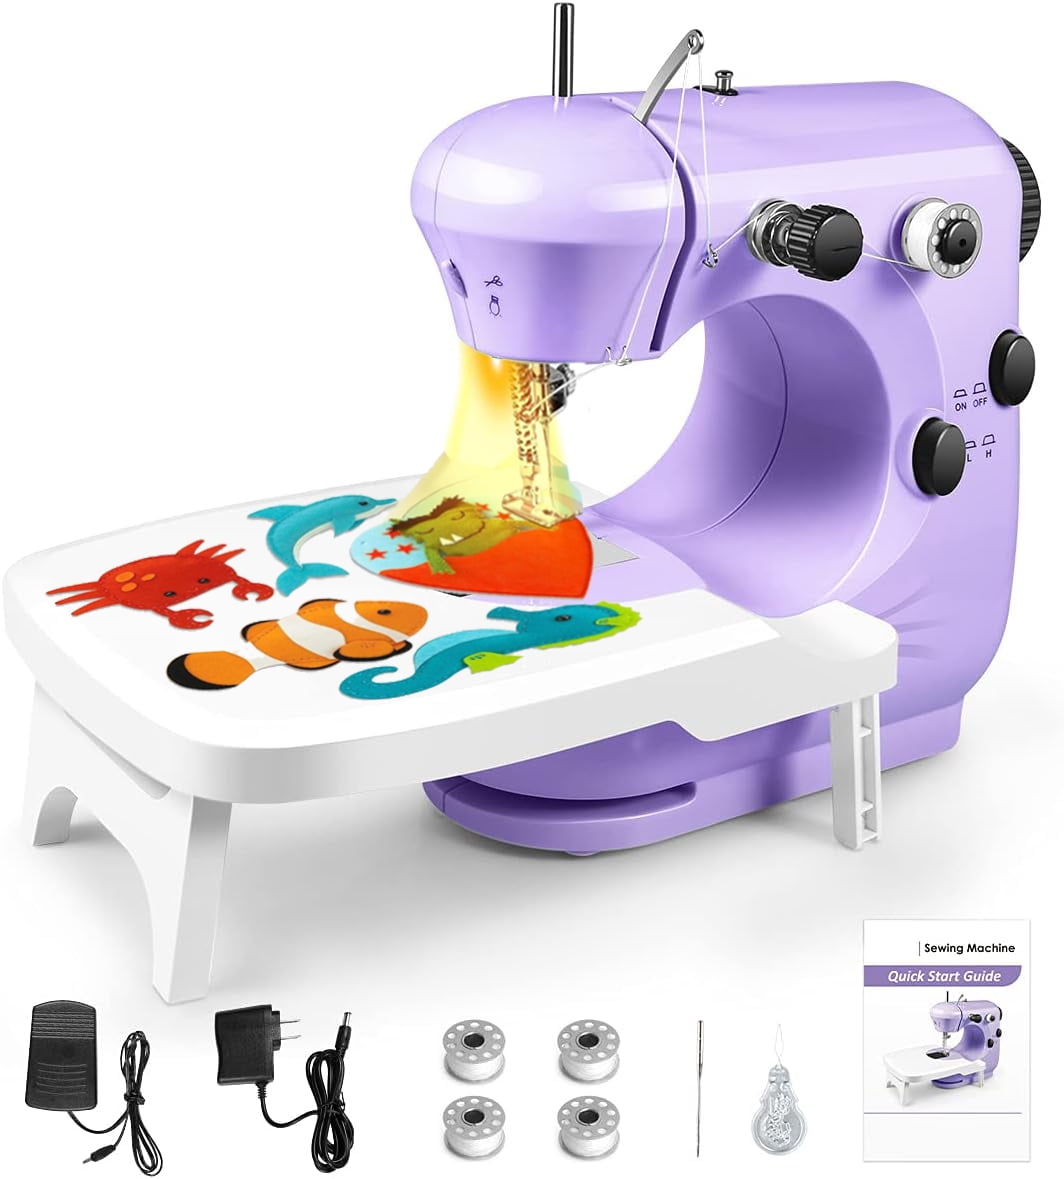 Sewing Machine, Small Sewing Machine with Extension Table for